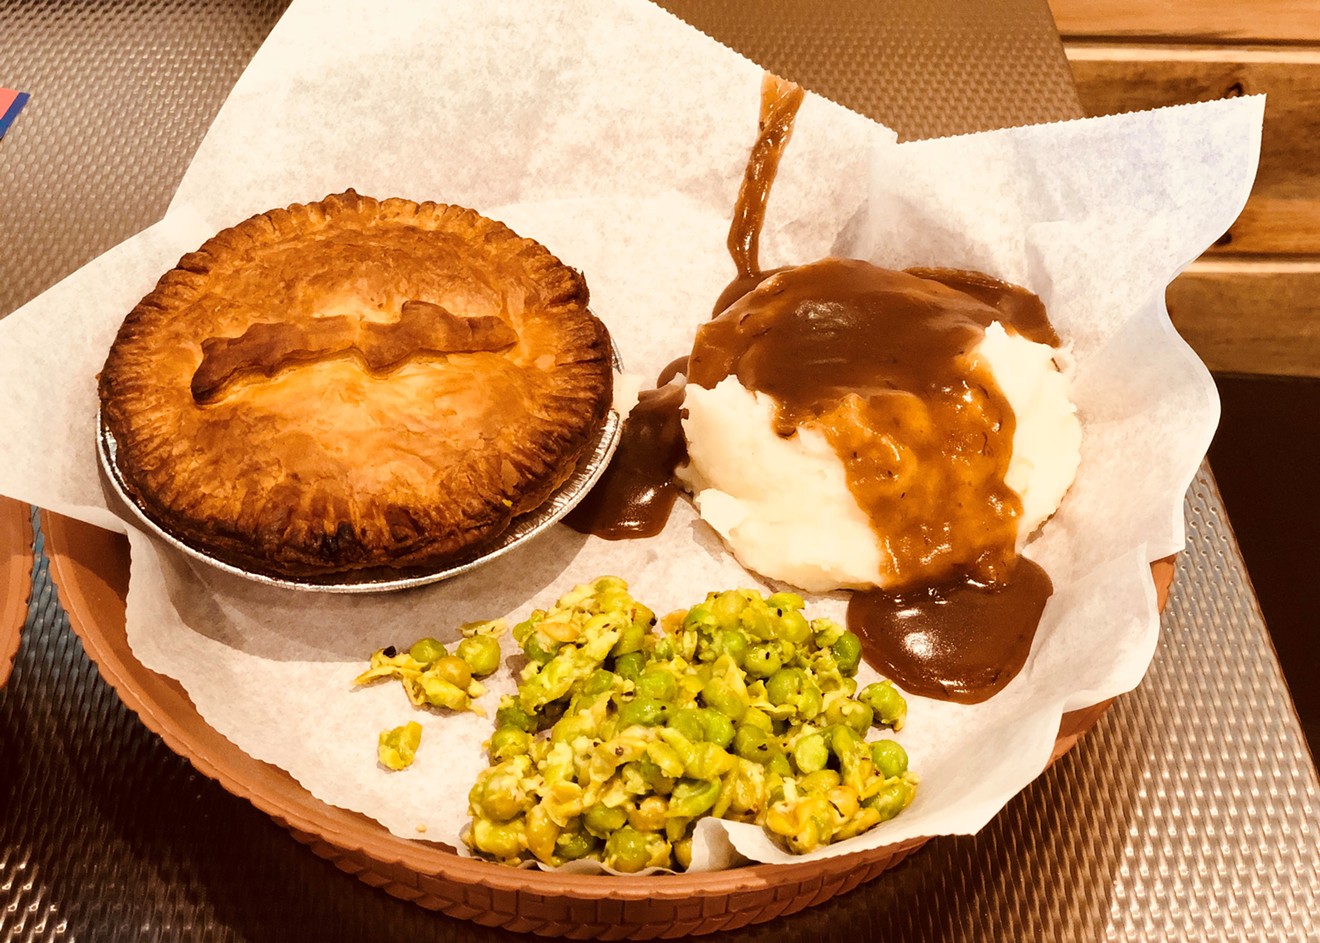 Meat pies, mashed potatoes and mushy peas are on deck at the Great Australian Bite.